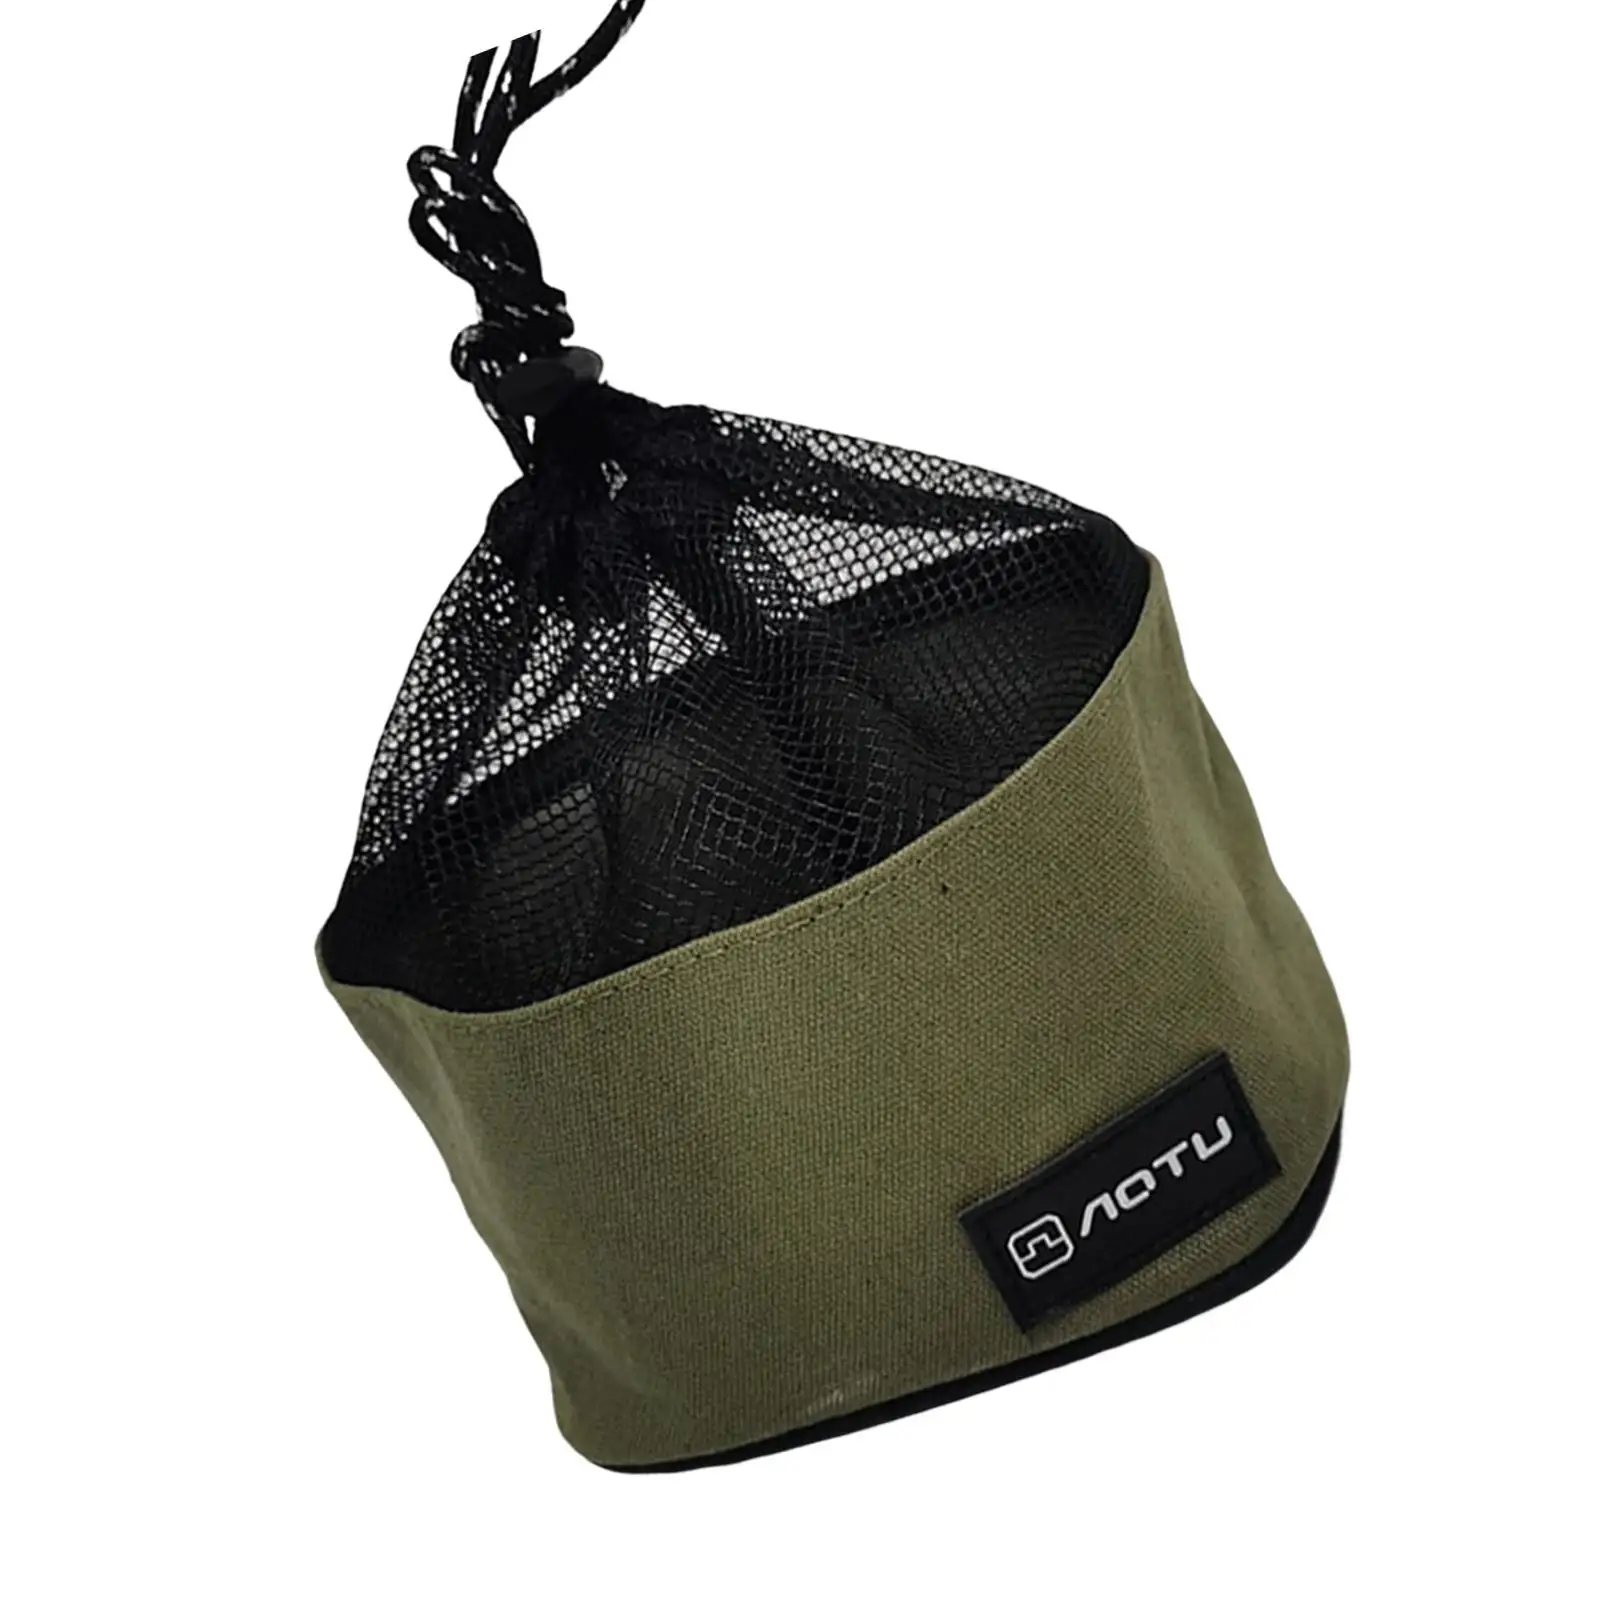 Portable Camping Cookware Storage Bag Drawstring Bag Tote Equipment Case Tableware Storage for Outdoor BBQ Dinner Cooking Hiking